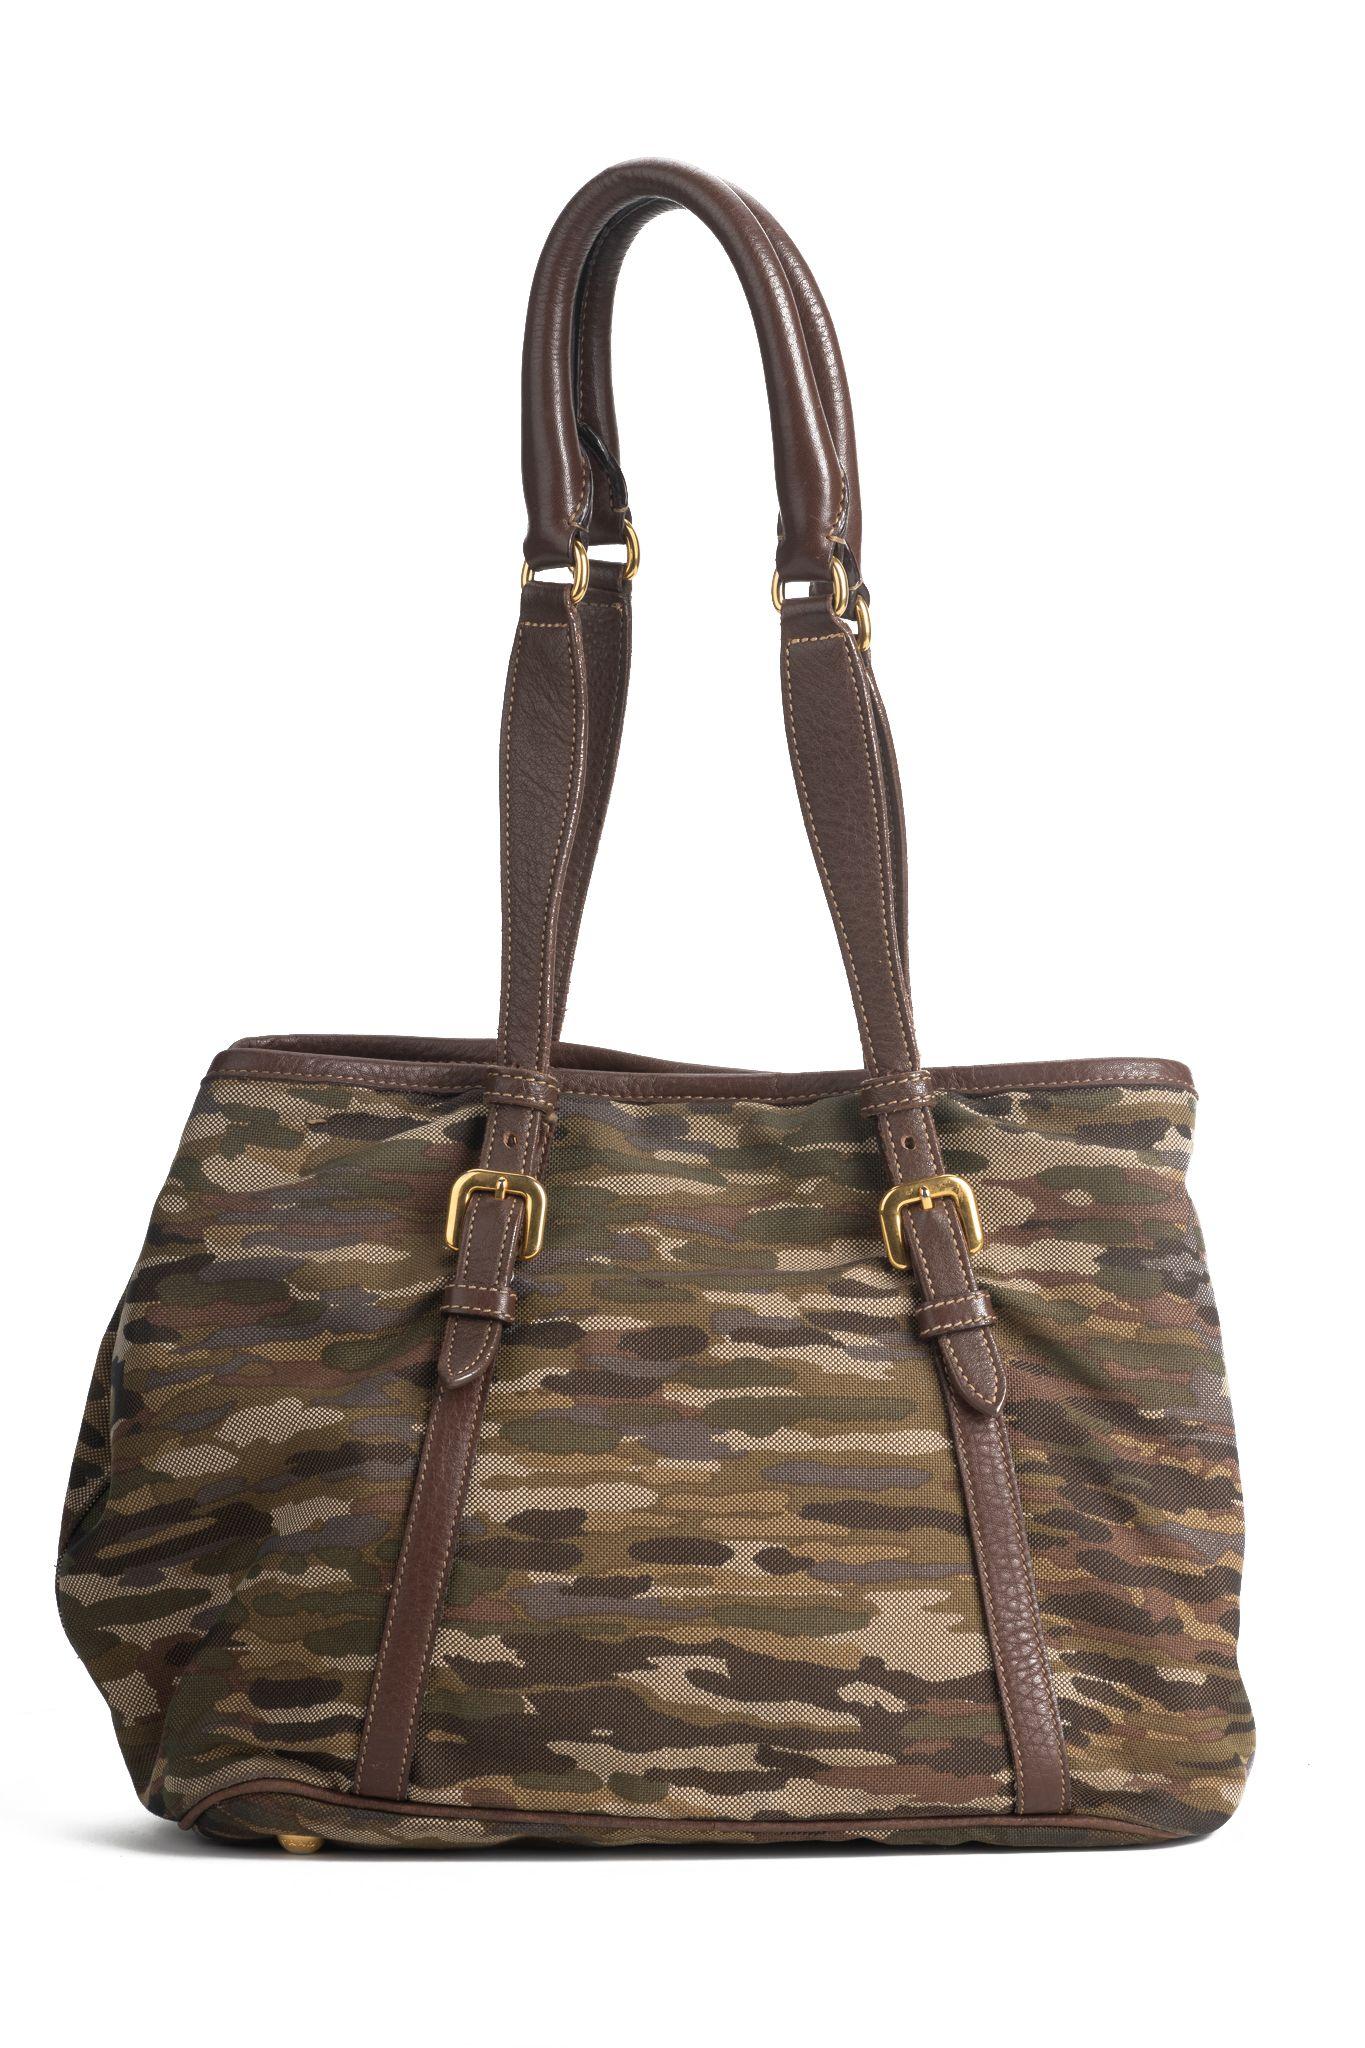 Women's Prada Camouflage 2 Way Tote For Sale